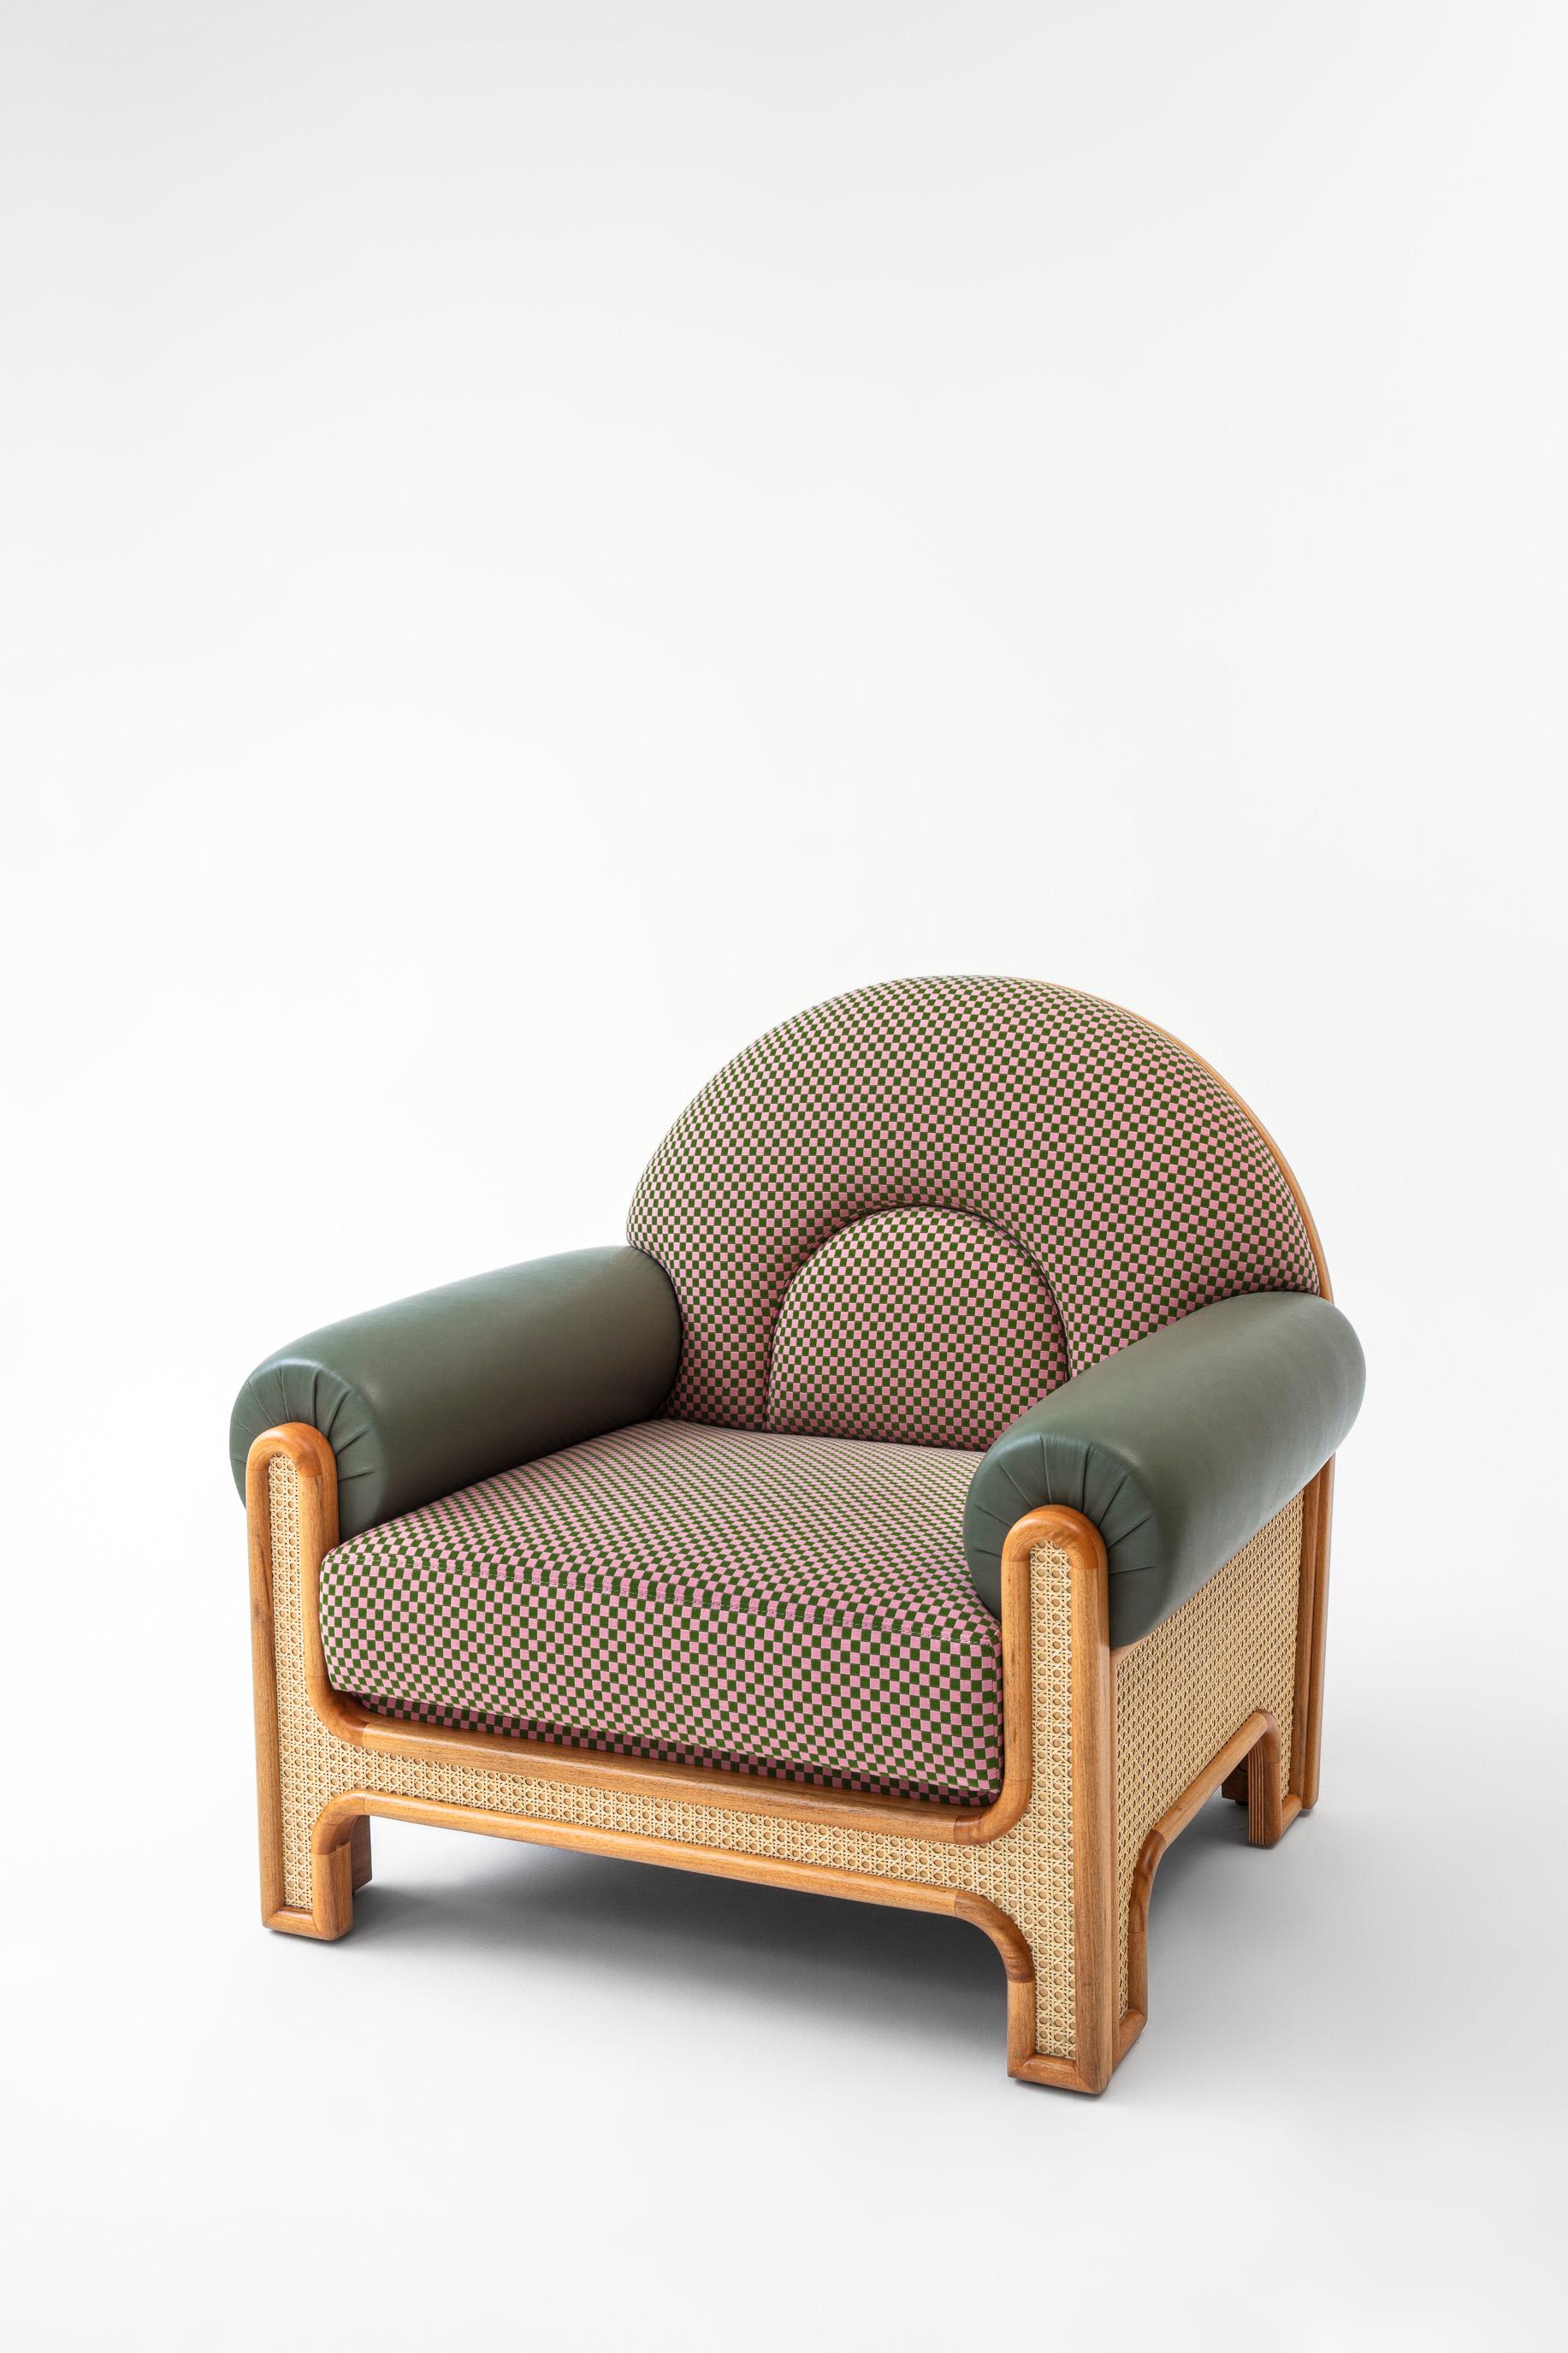 The N-gene armchair is a reinterpretation of an armchair designed by Merve’s uncle, interior designer, Engin, in the 1970s. The N-Gene is re-envisioned with caning, and is upholstered in a checker textile with purple leather arms. This entirely